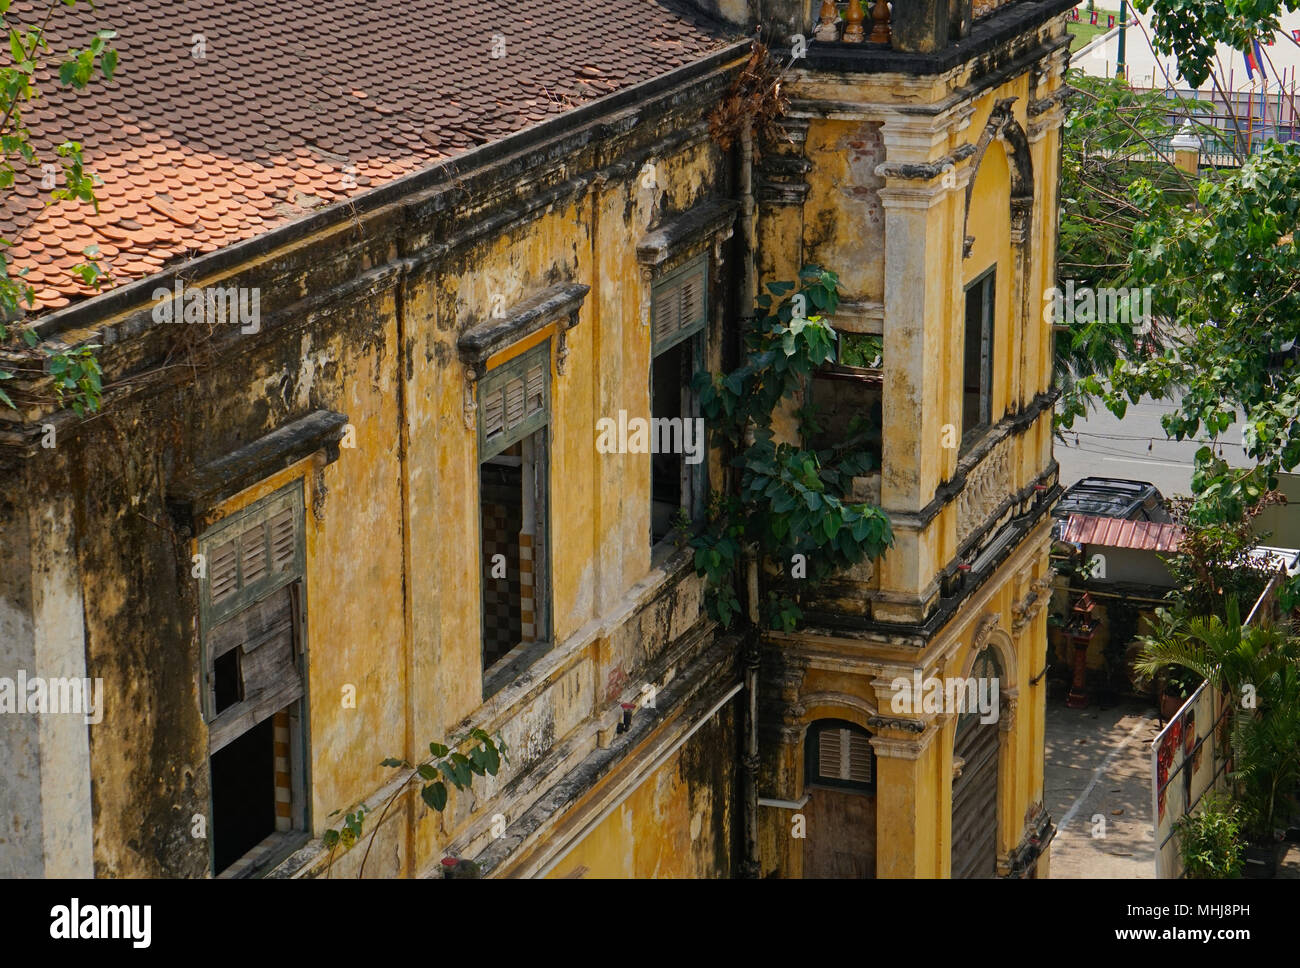 View of an old building owned by the The Foreign Correspondents' Club (FCC) in Phnom Penh, capital of Cambodia. The Mansion Heritage Bar. Stock Photo